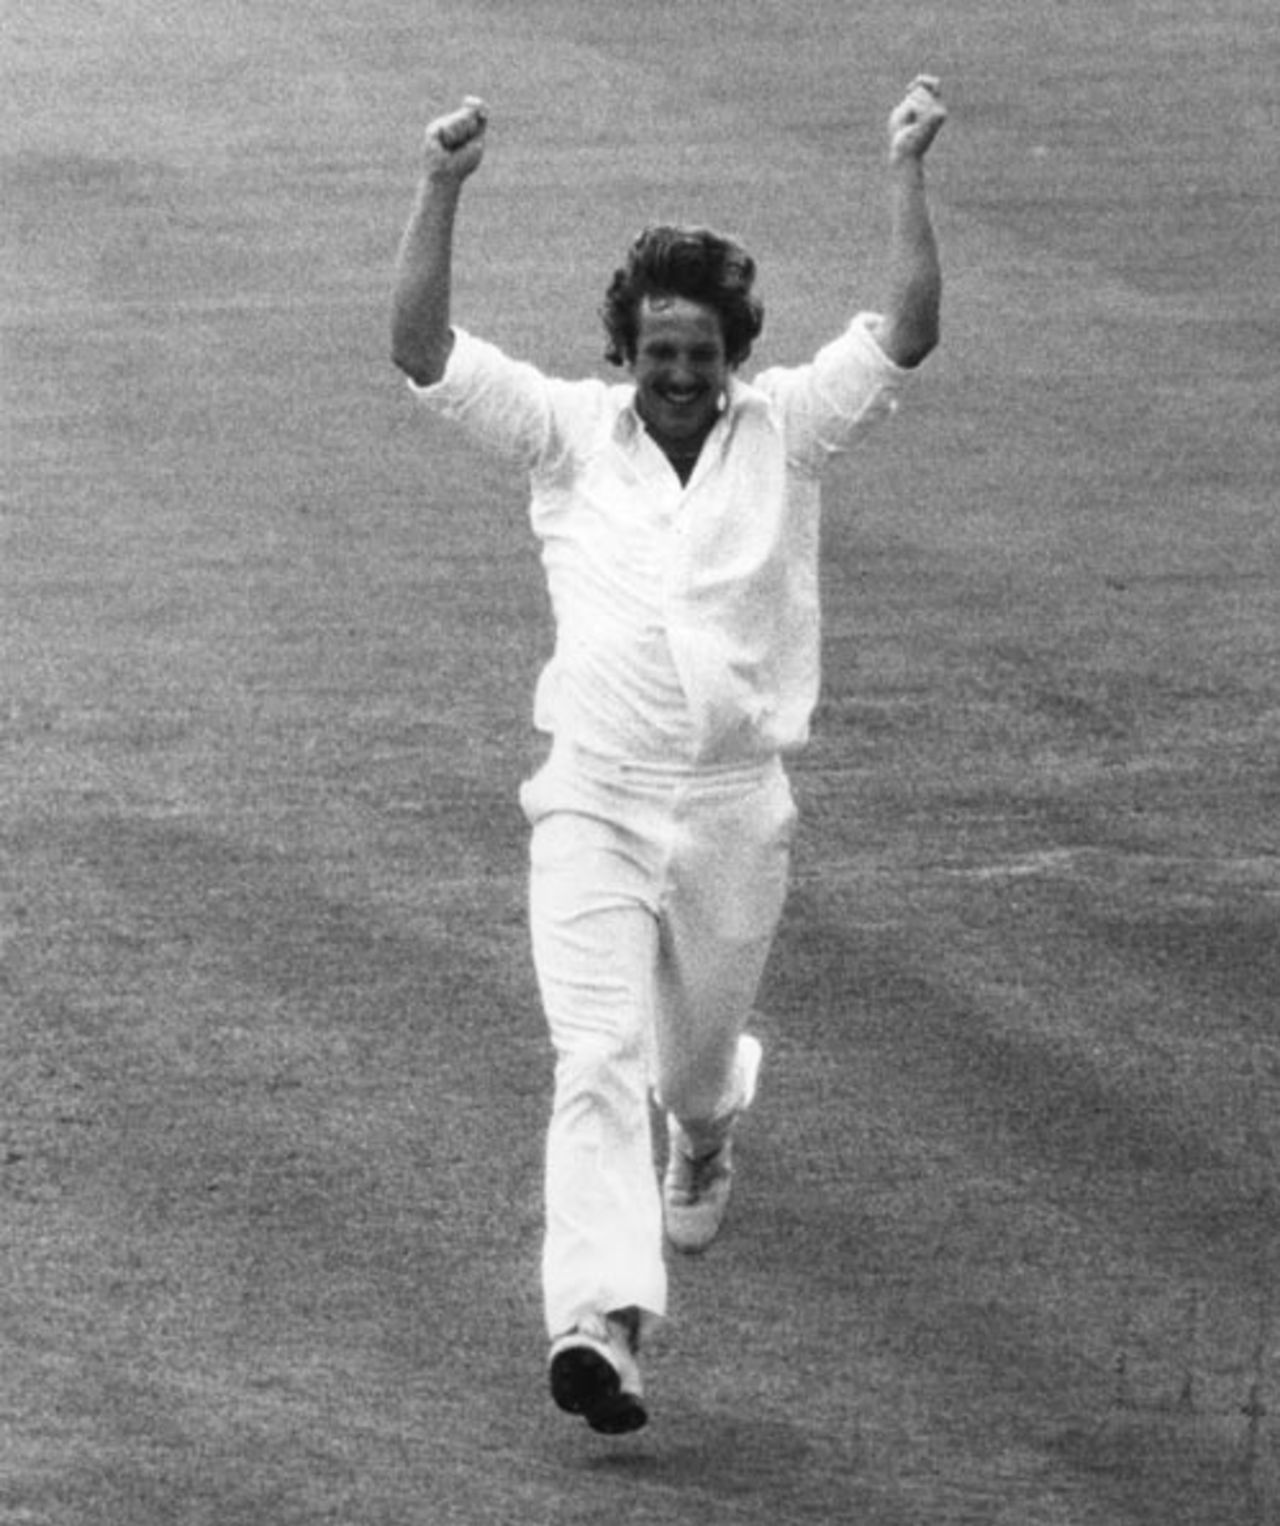 Ian Botham is delighted at getting his 100th Test wicket, England v India, 2nd Test, Lord's, August 6, 1979